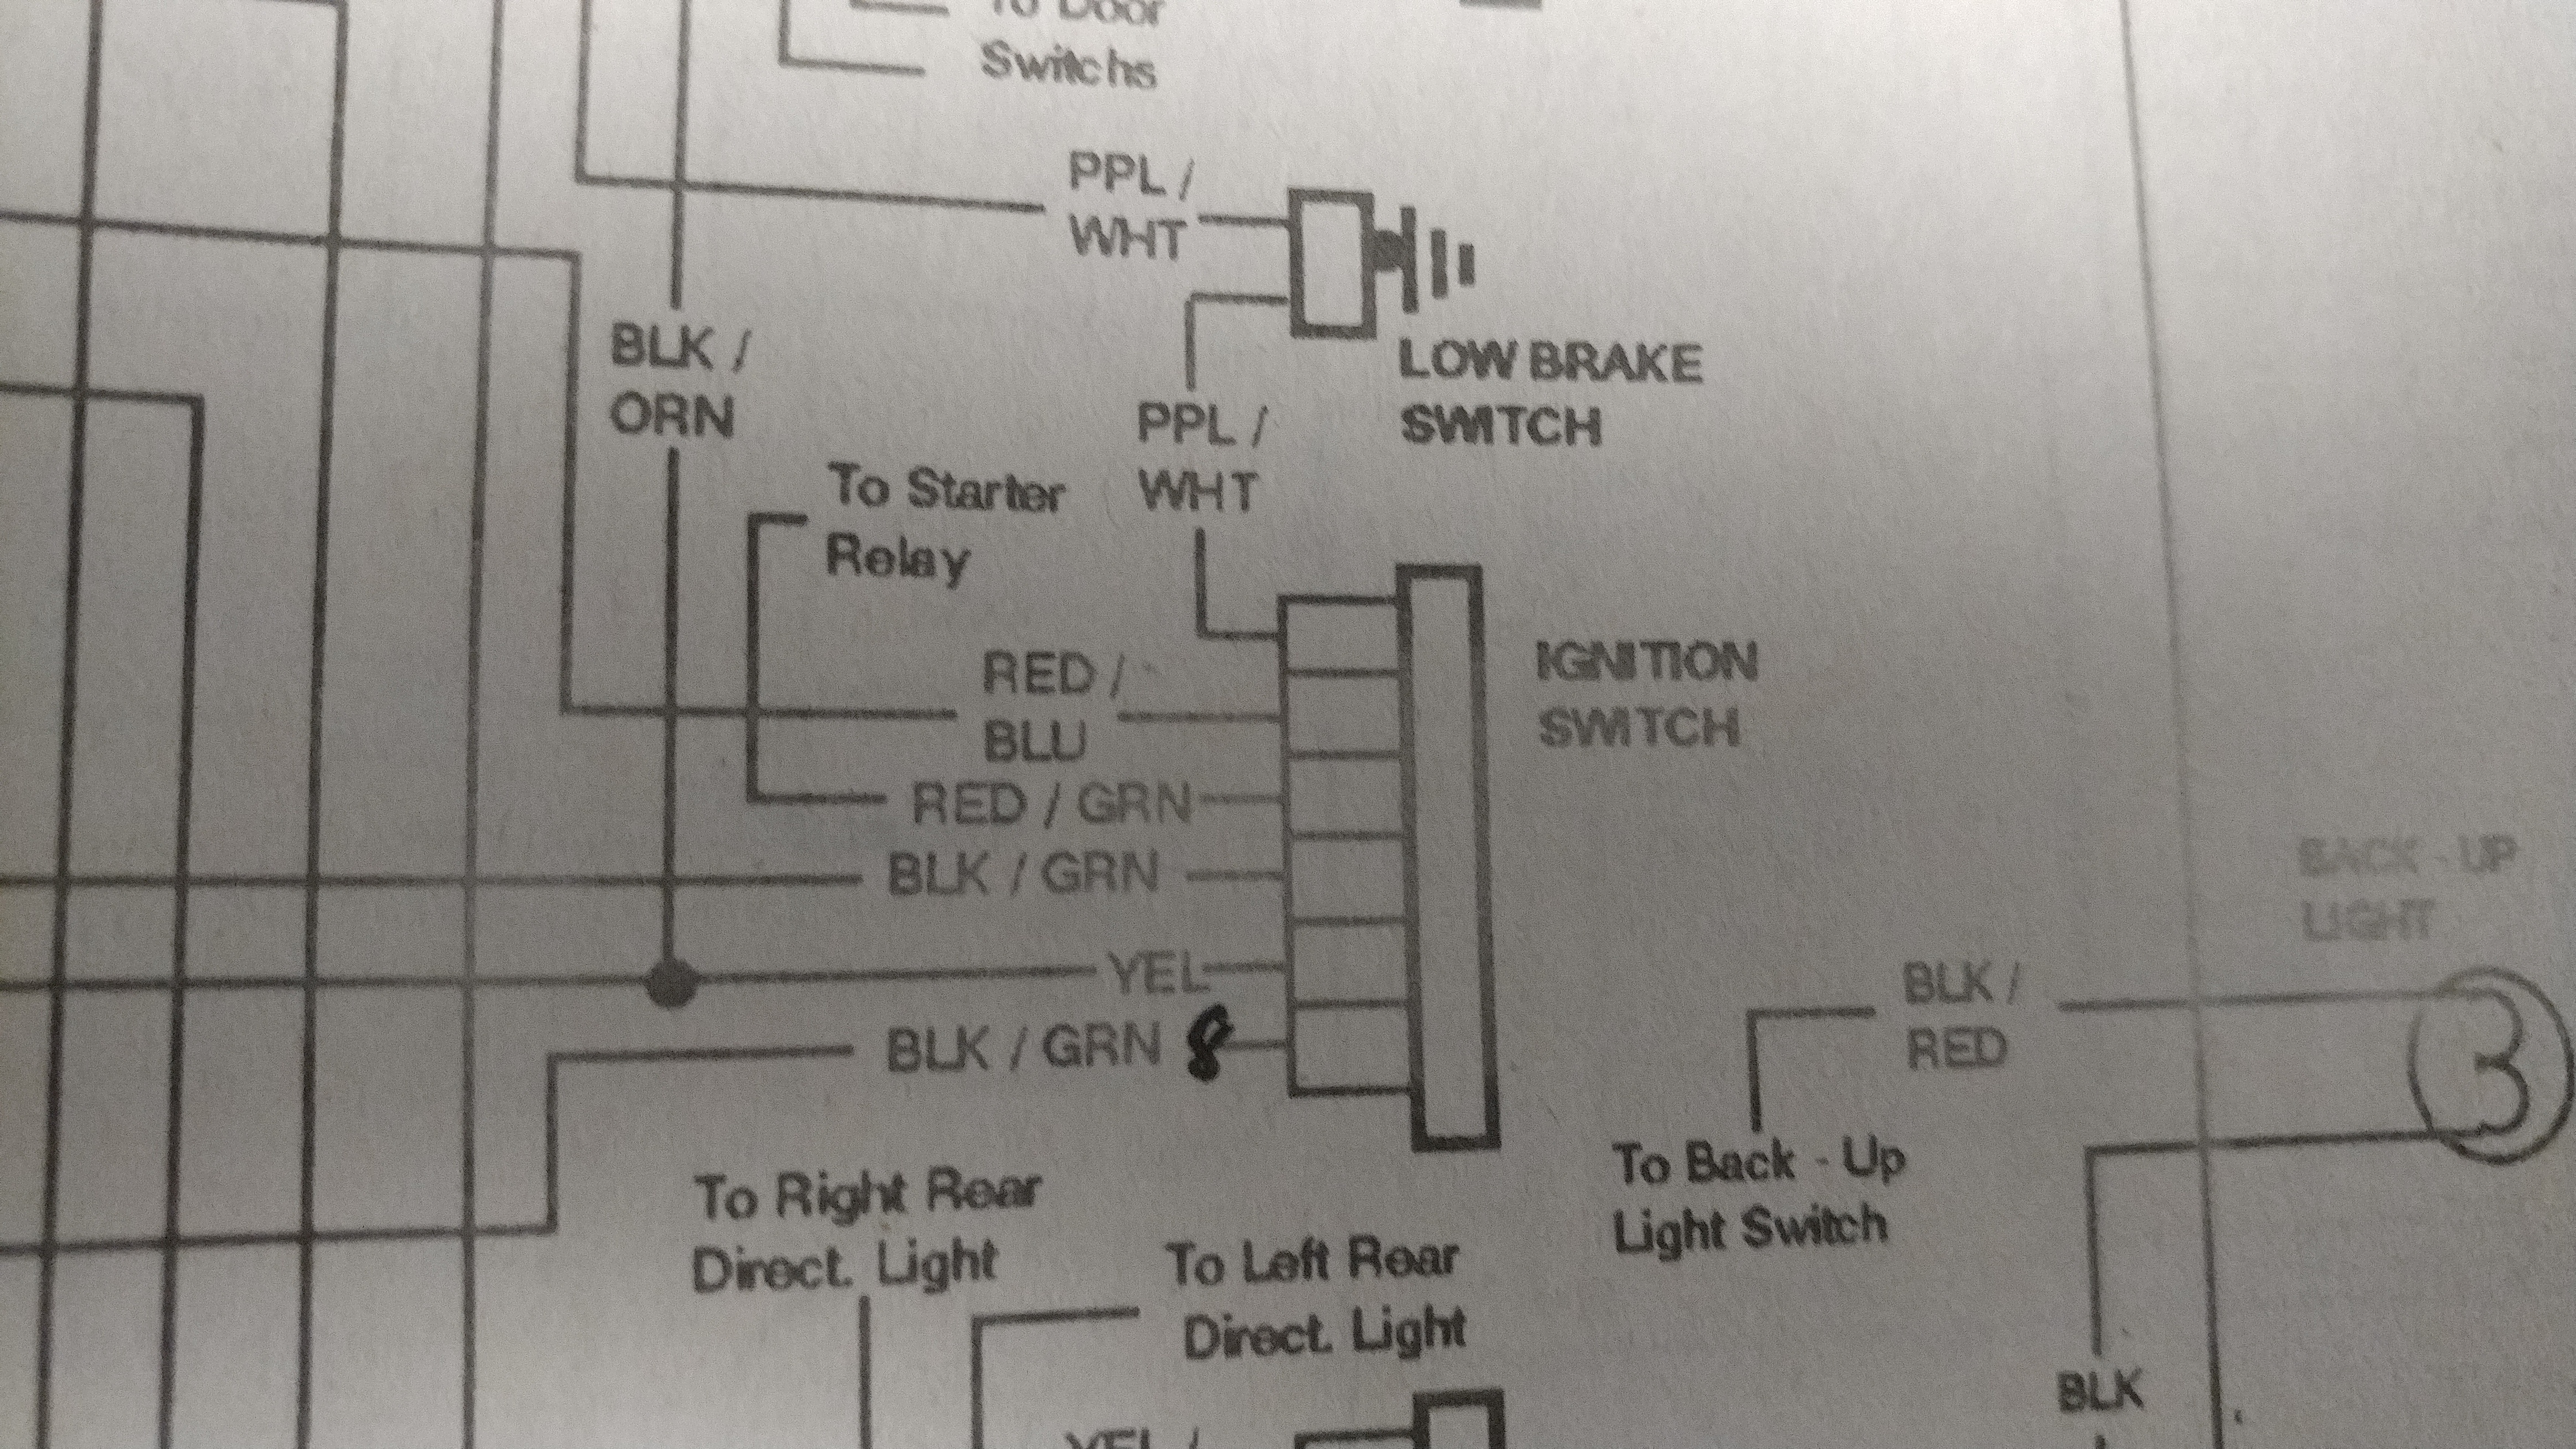 How to Read Wiring Diagram - Ford F150 Forum - Community of Ford Truck Fans